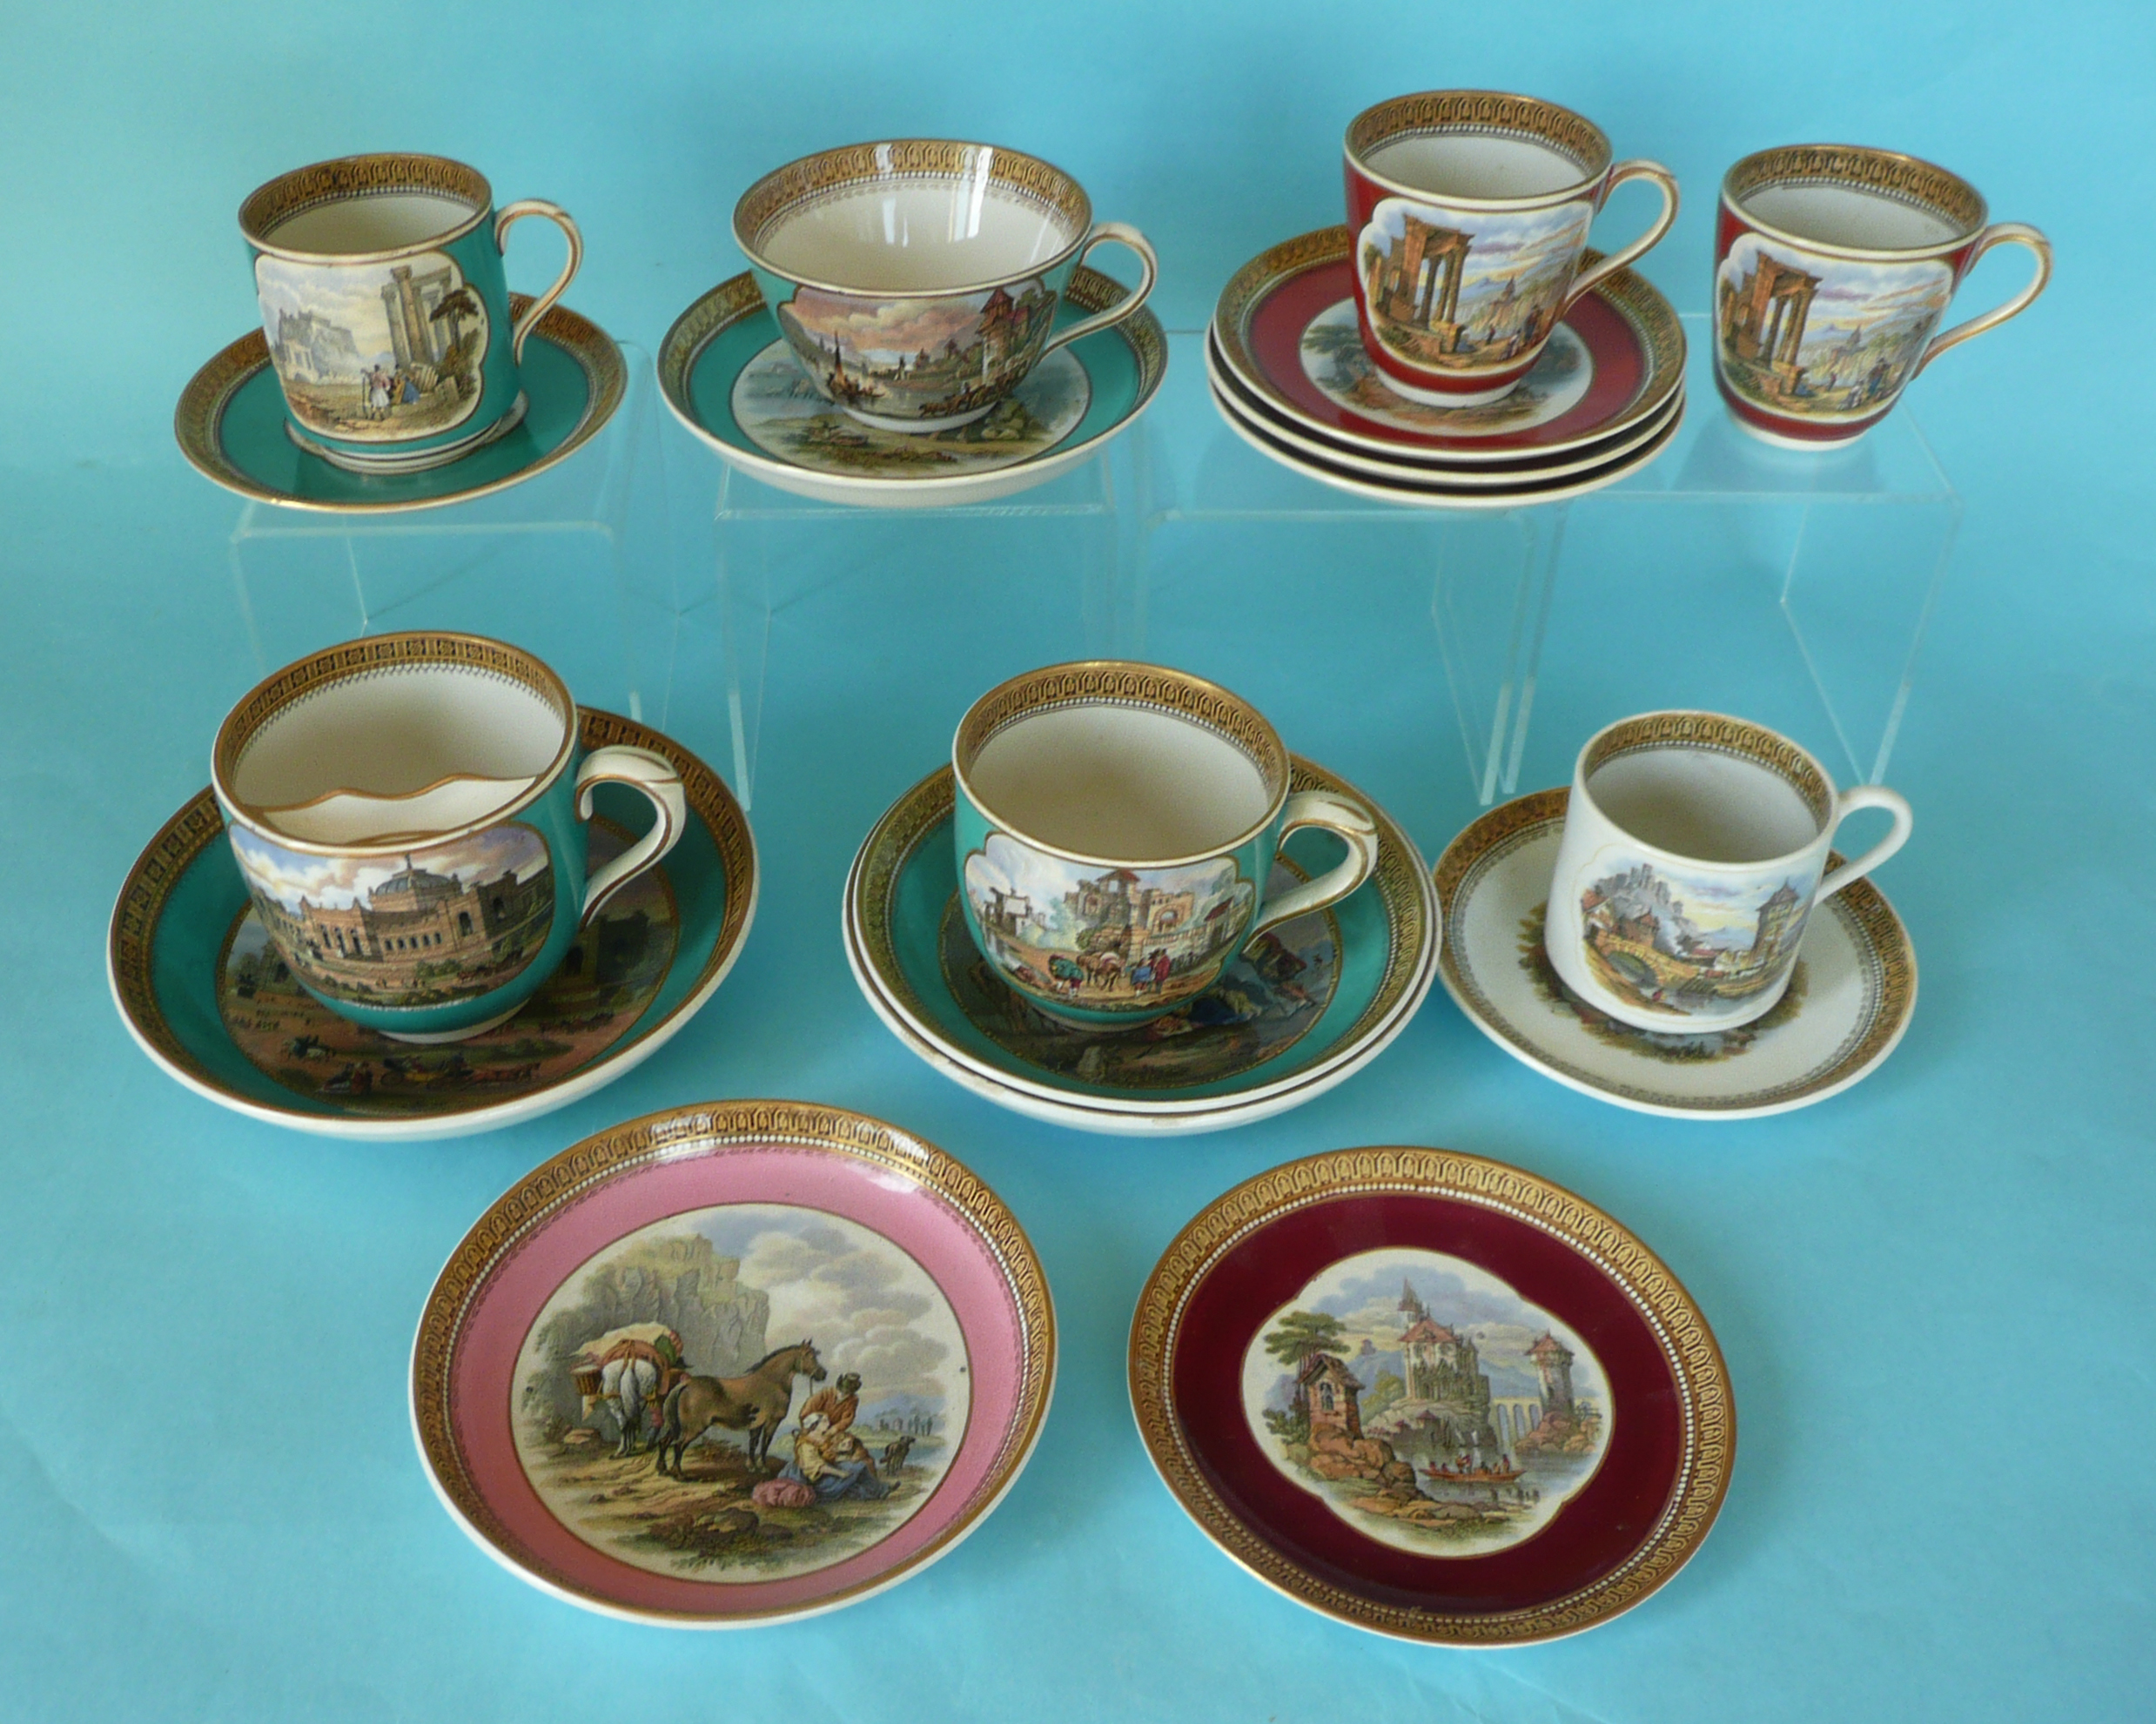 A moustache cup and saucer, three cups and four saucers all green, two red cups